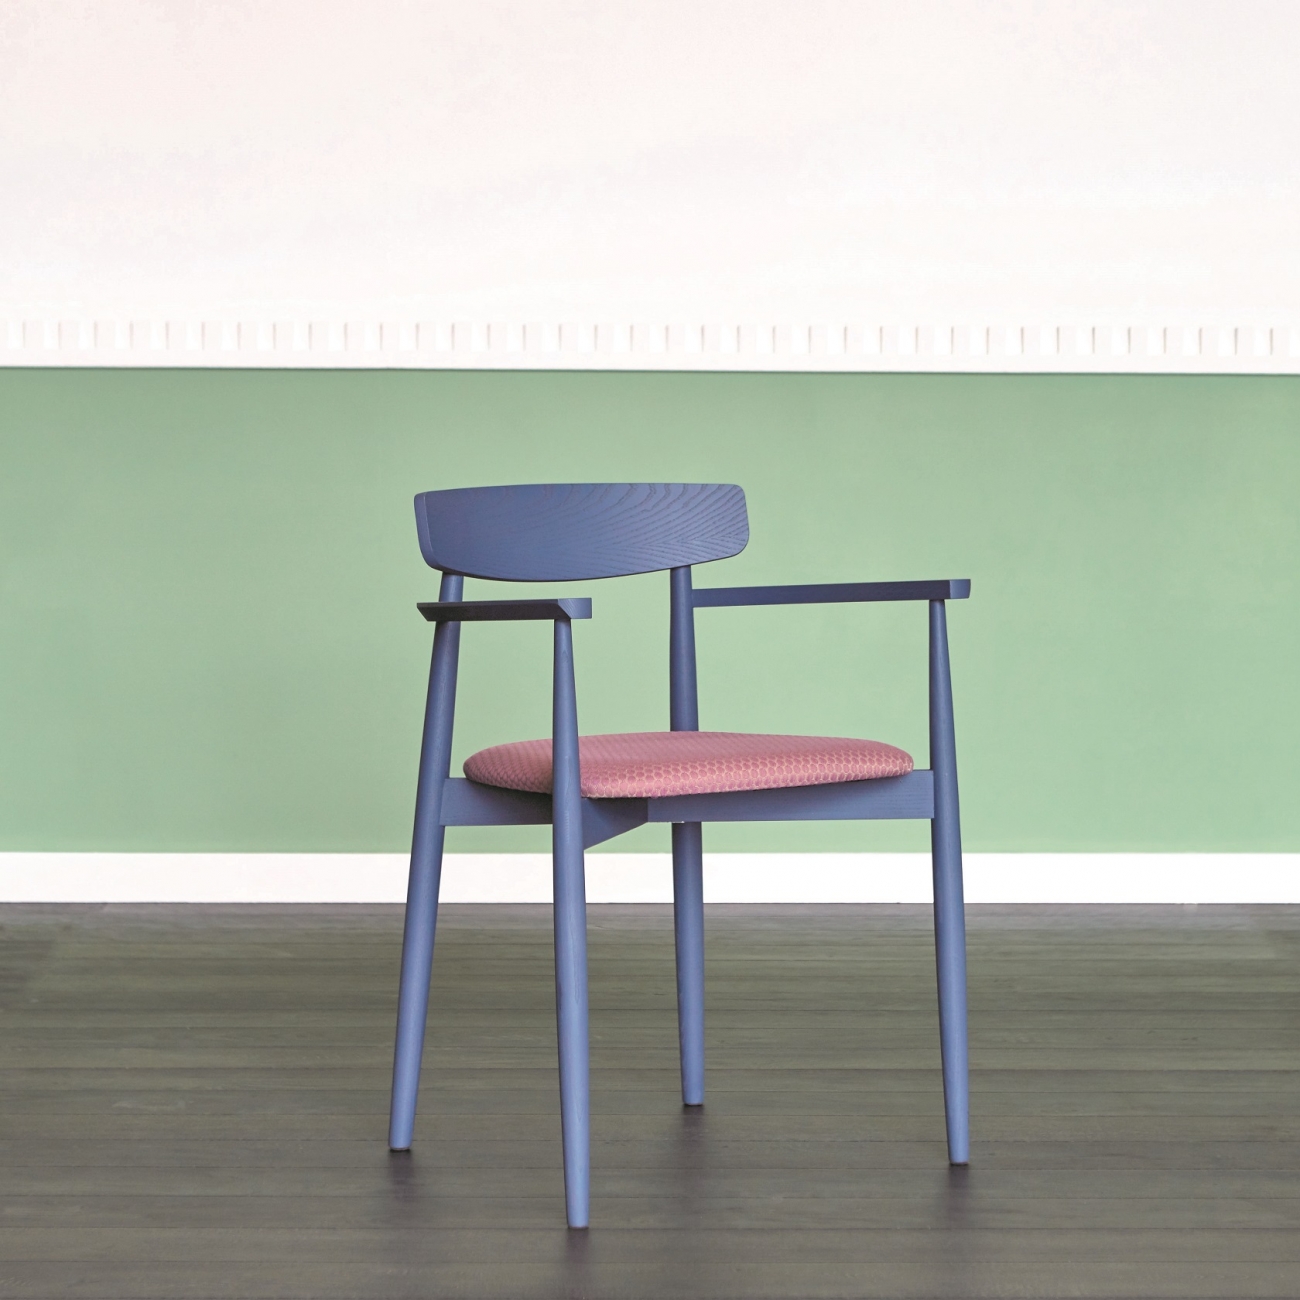 MINIFORMS CLARETTA CHAIR WITH ARMRESTS